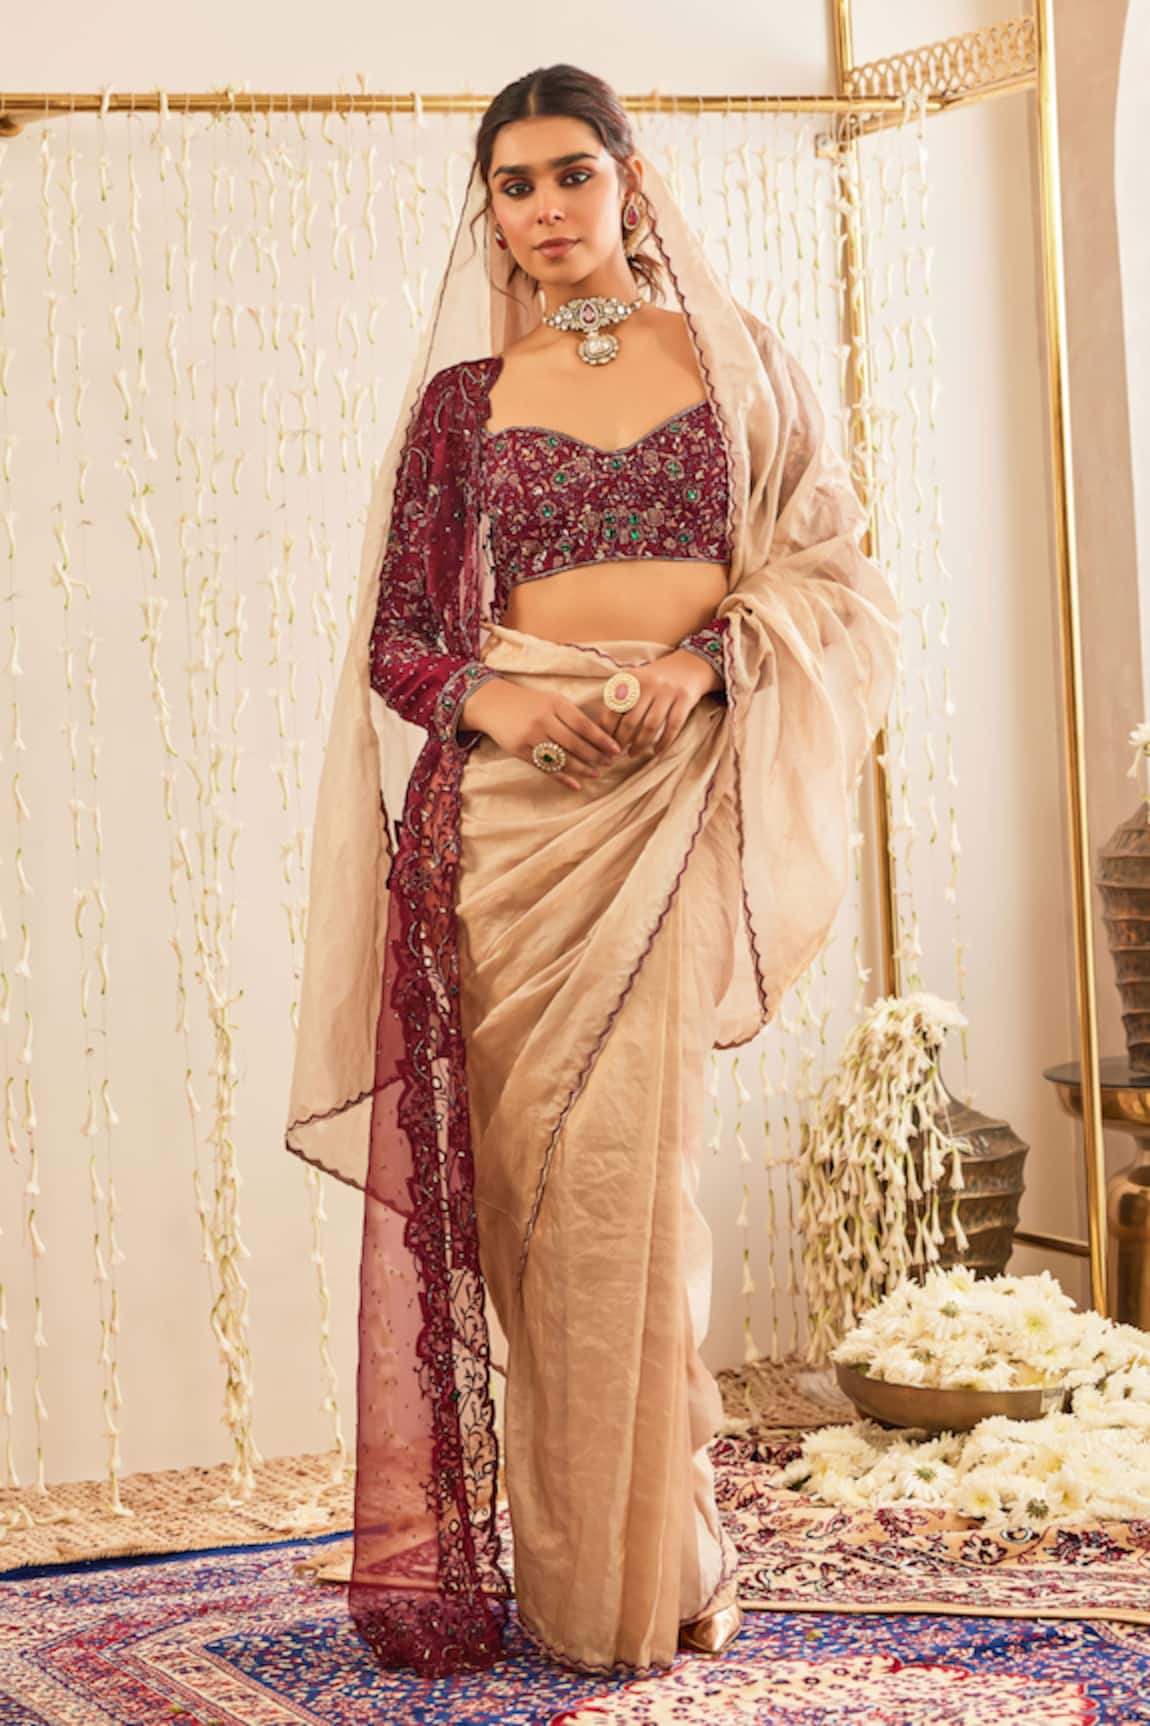 Tabeer India Scallop Bordered Pre-Draped Saree Set With Stole